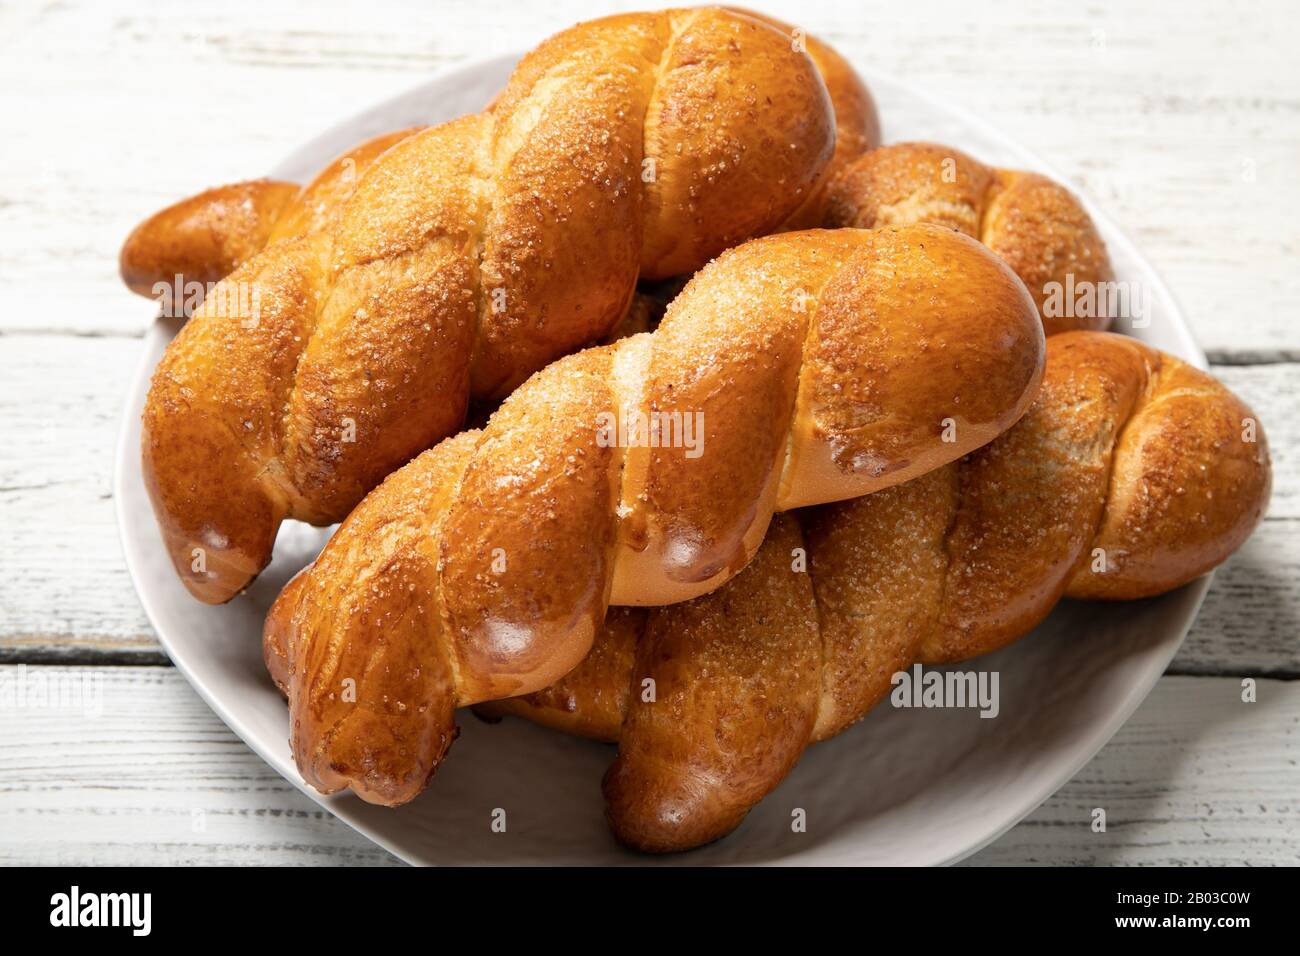 Delicious pastries.Tasty buns.Delicious Pigtail Buns.Close-up Stock Photo